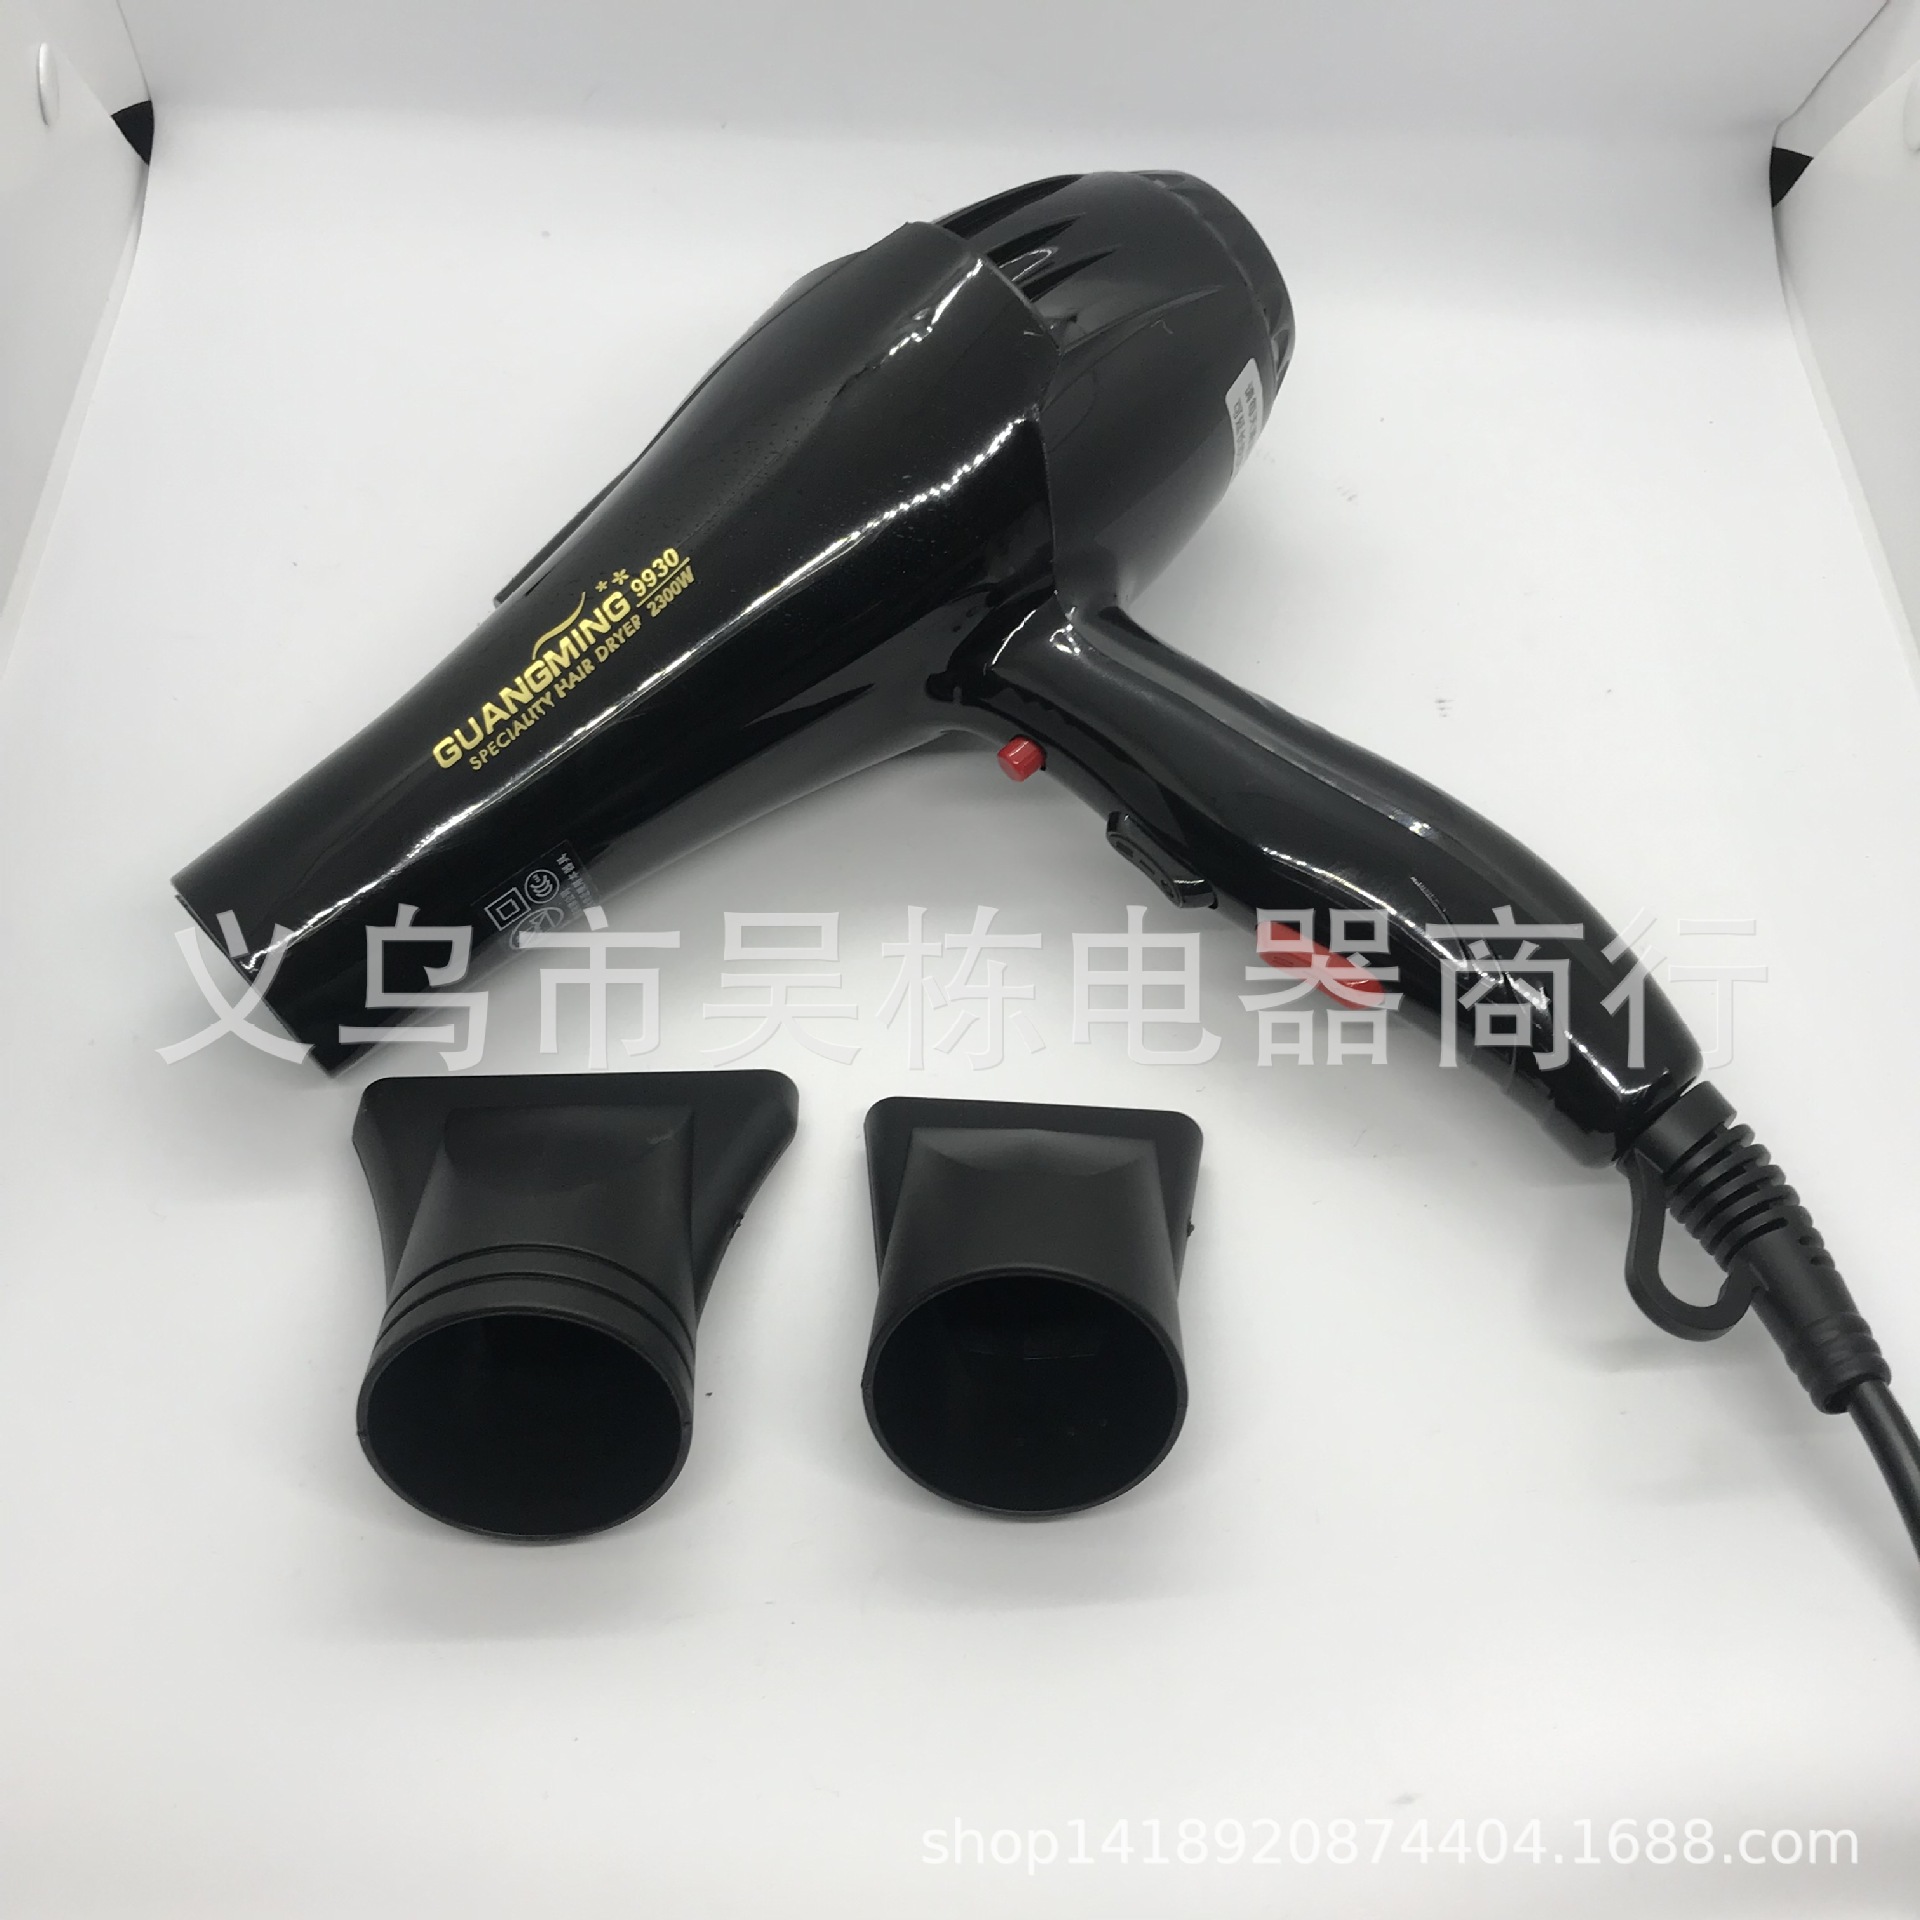 High-Power Mute Hair Dryer Hair Dryer Hot and Cold Double Wind Household Electric Hair Dryer Bright 9930 Hair Salon